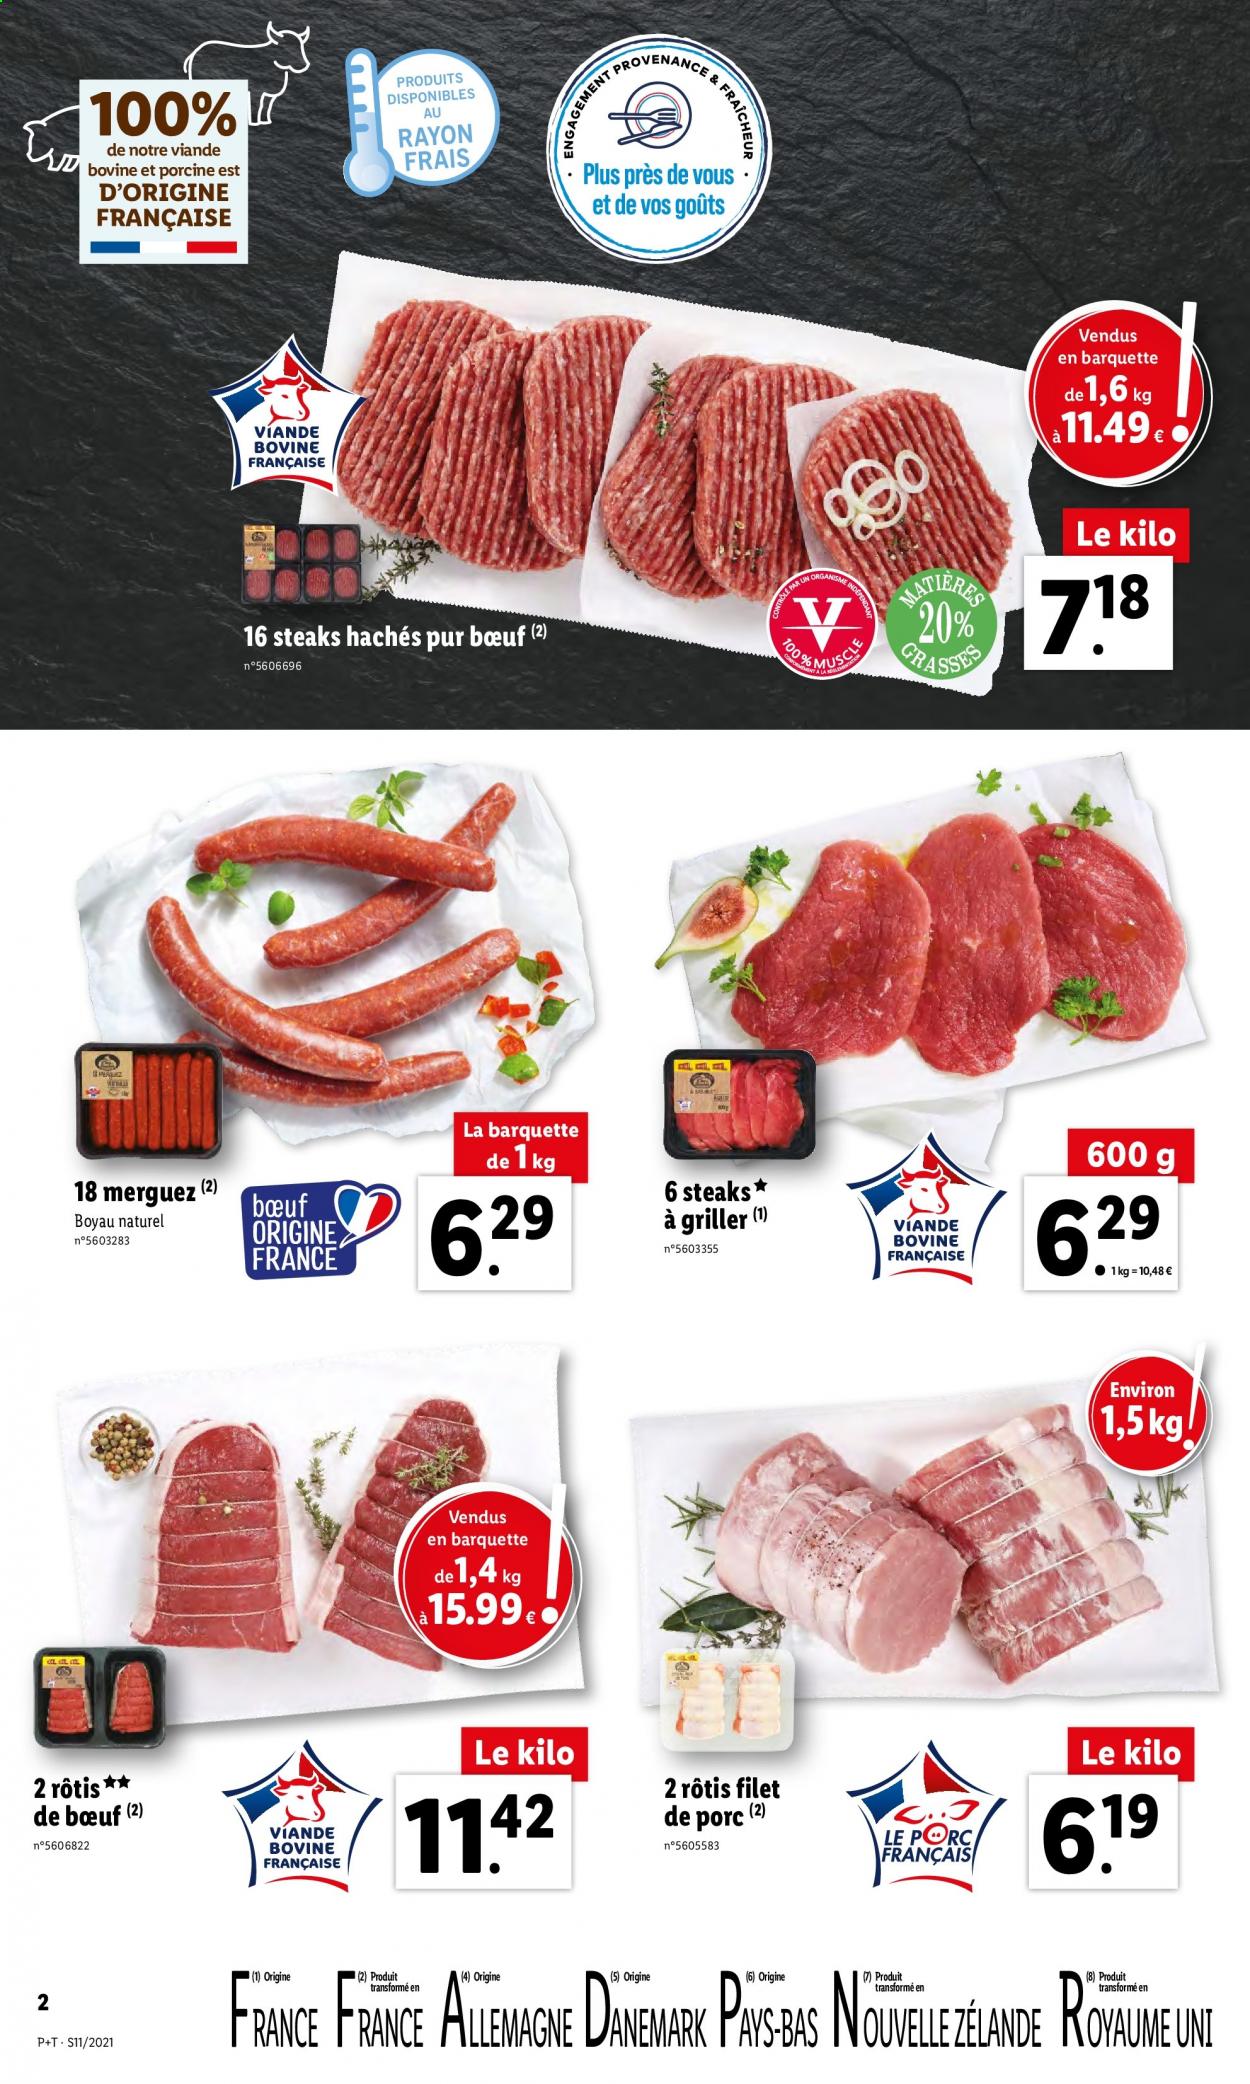 Catalogue Lidl - 17.03.2021 - 23.03.2021. Page 2.